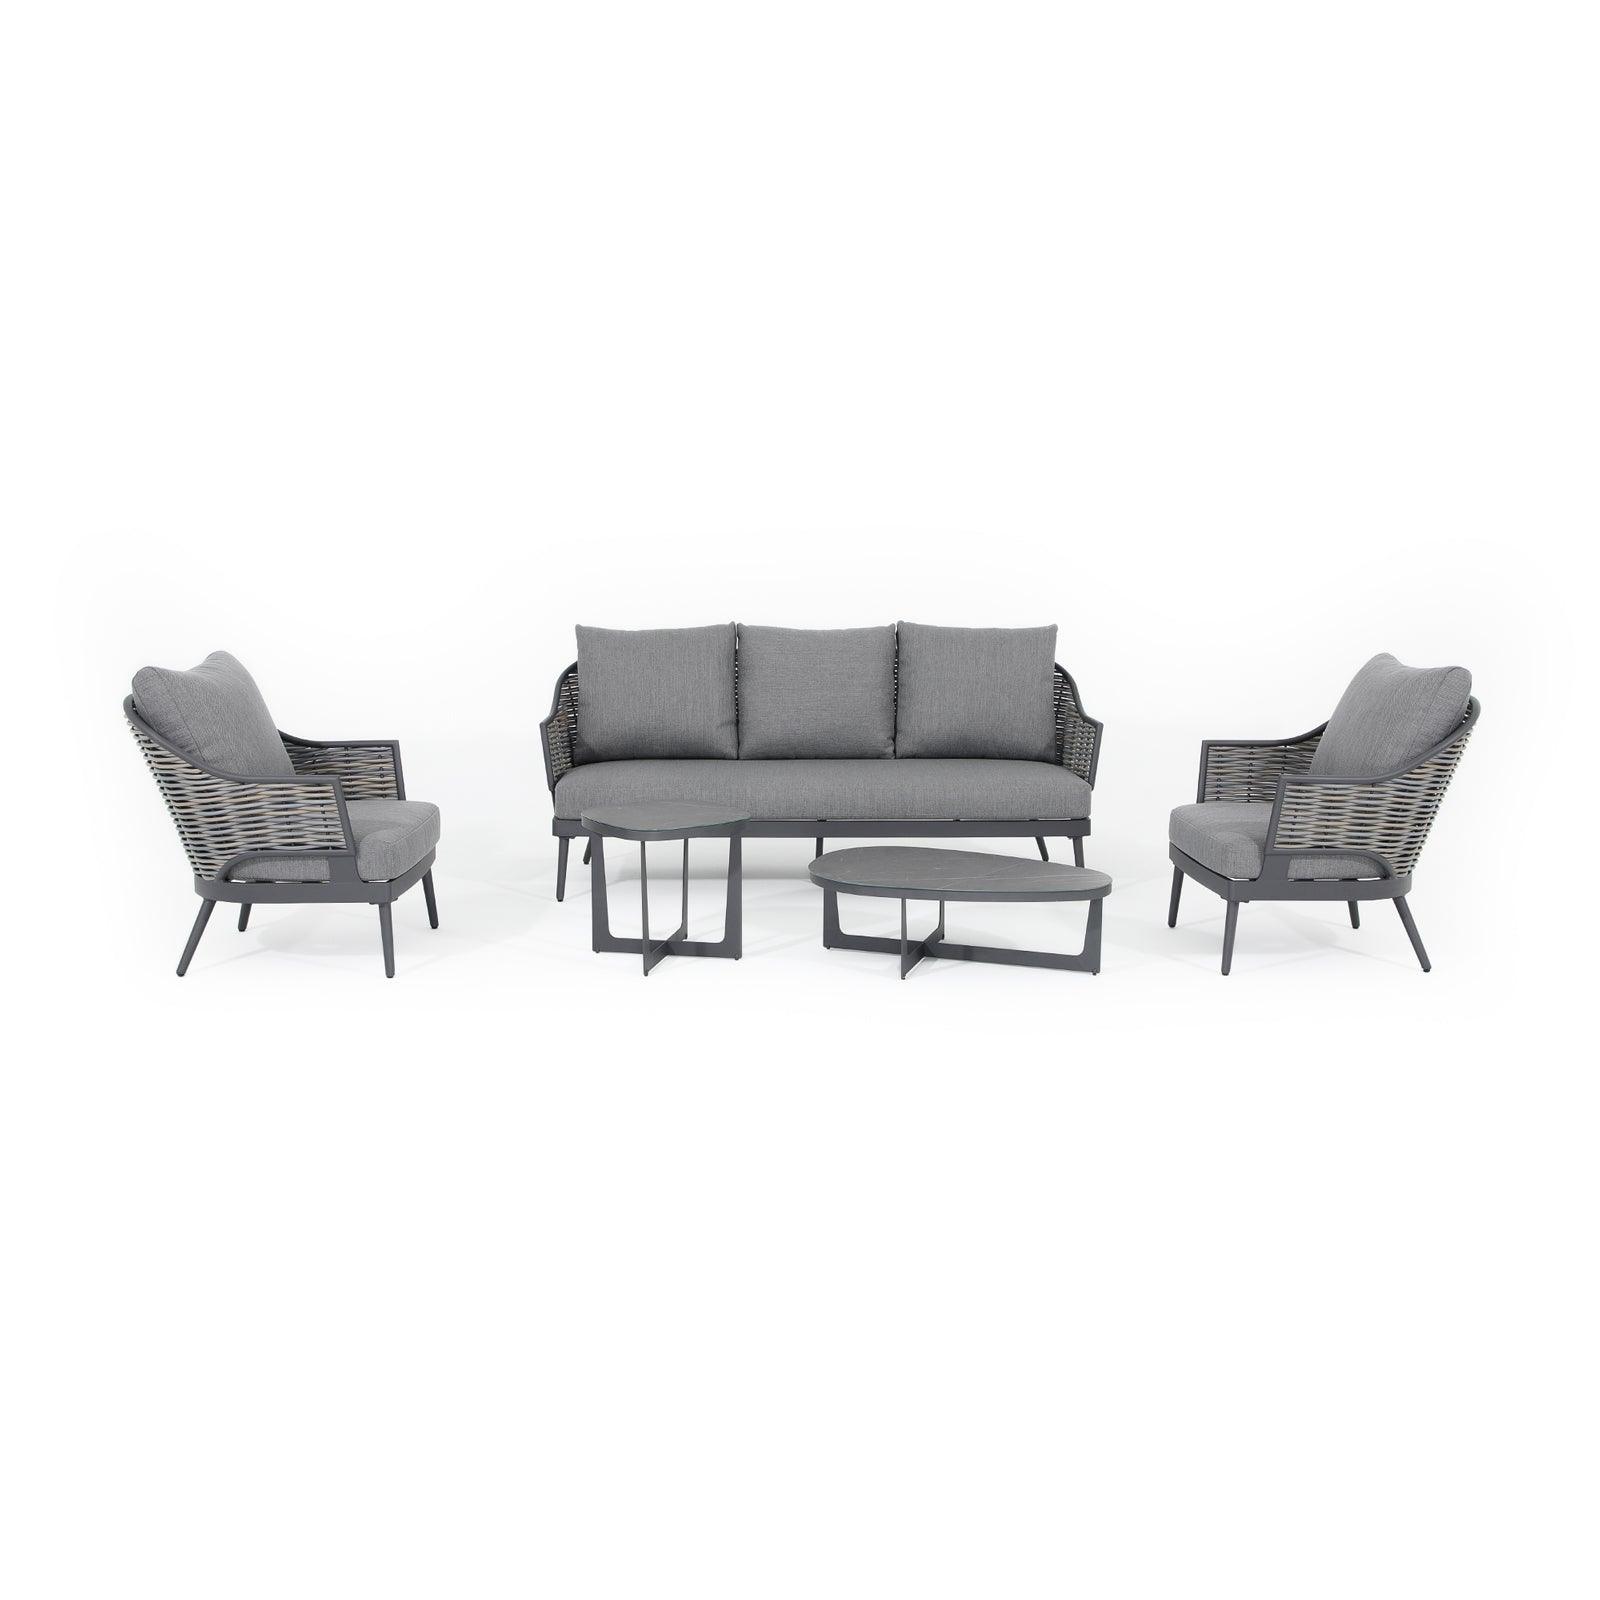 Burano Modern Wicker Outdoor Furniture, 5-Piece Grey wicker outdoor Sofa Set with aluminum frame, grey cushions, a three-seater sofa, 2 armchairs, 1 mixed set of tables - Jardina Furniture